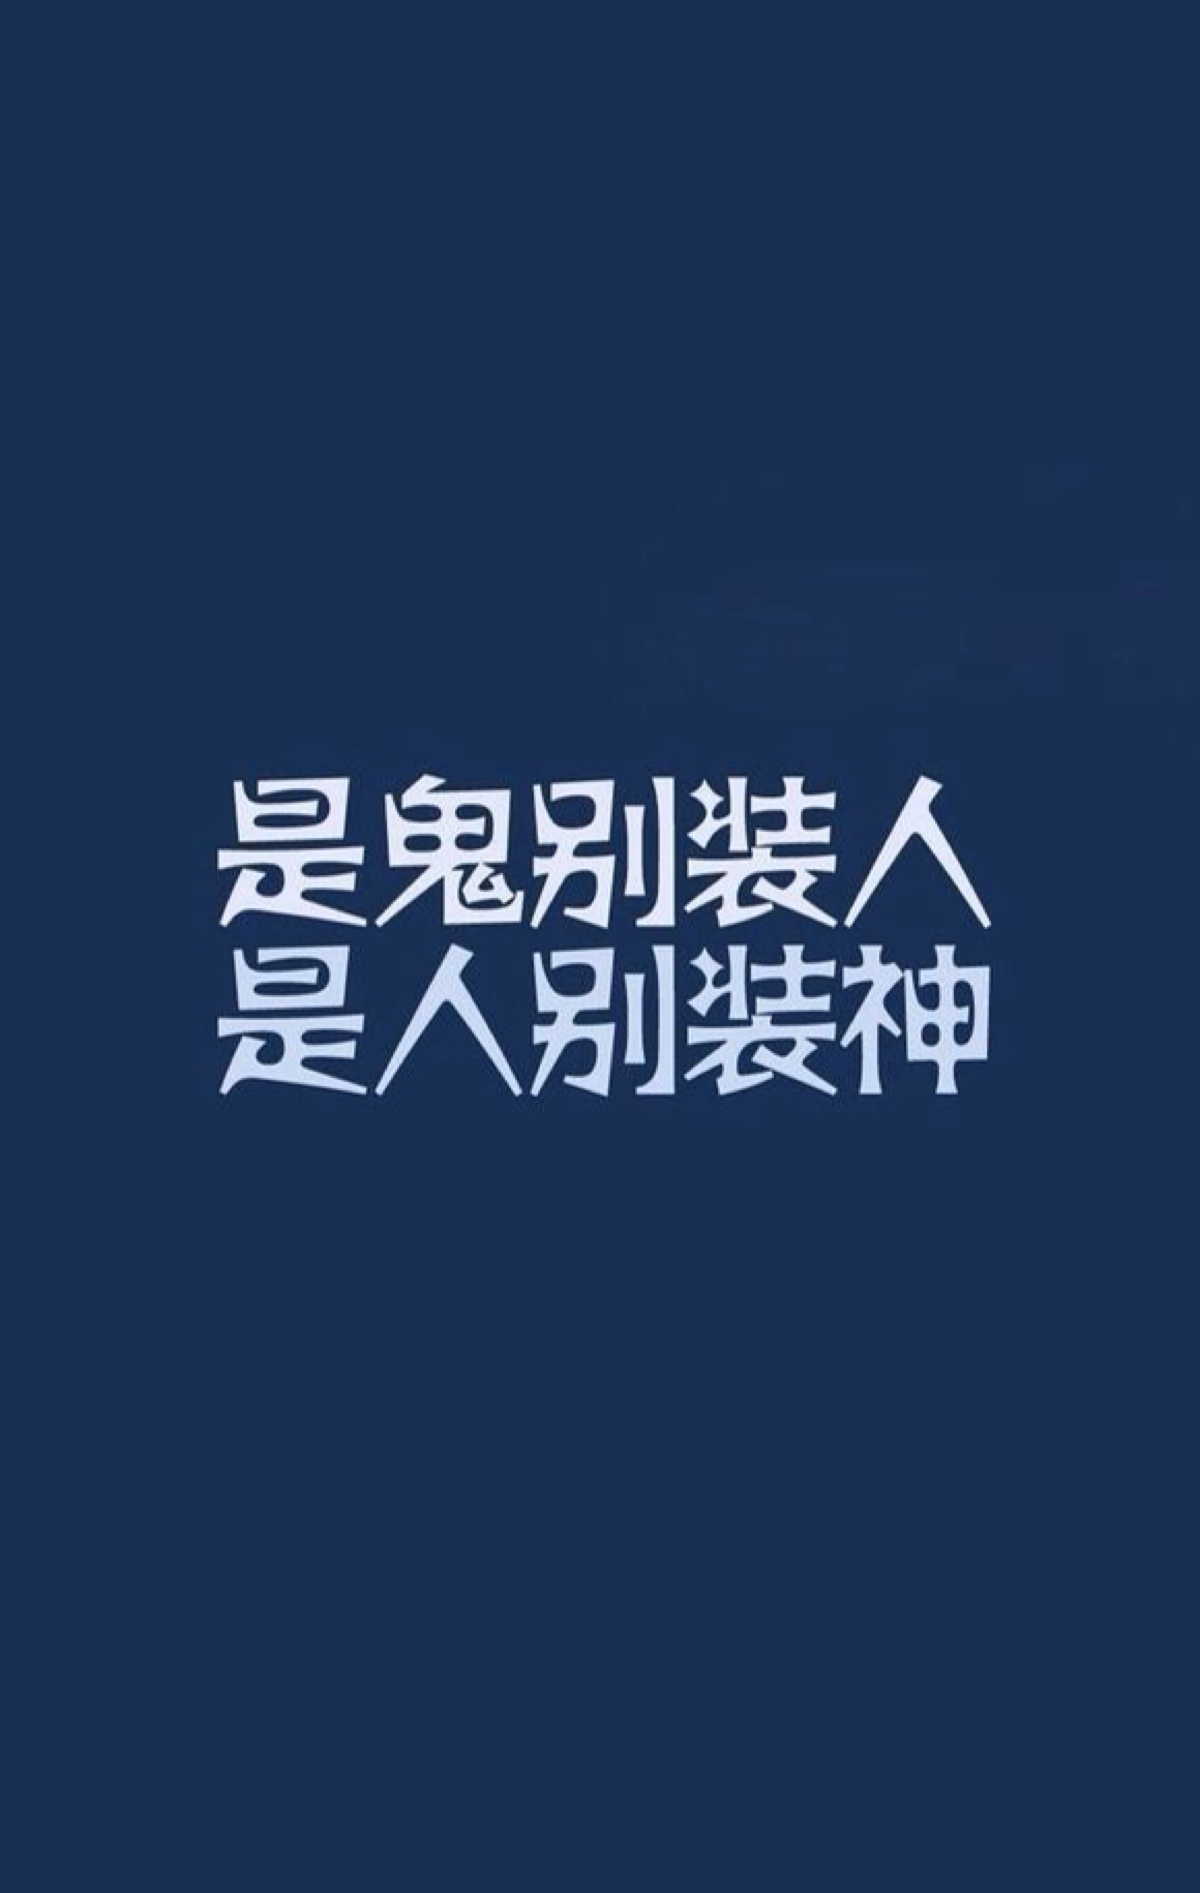 iphone壁纸 文字